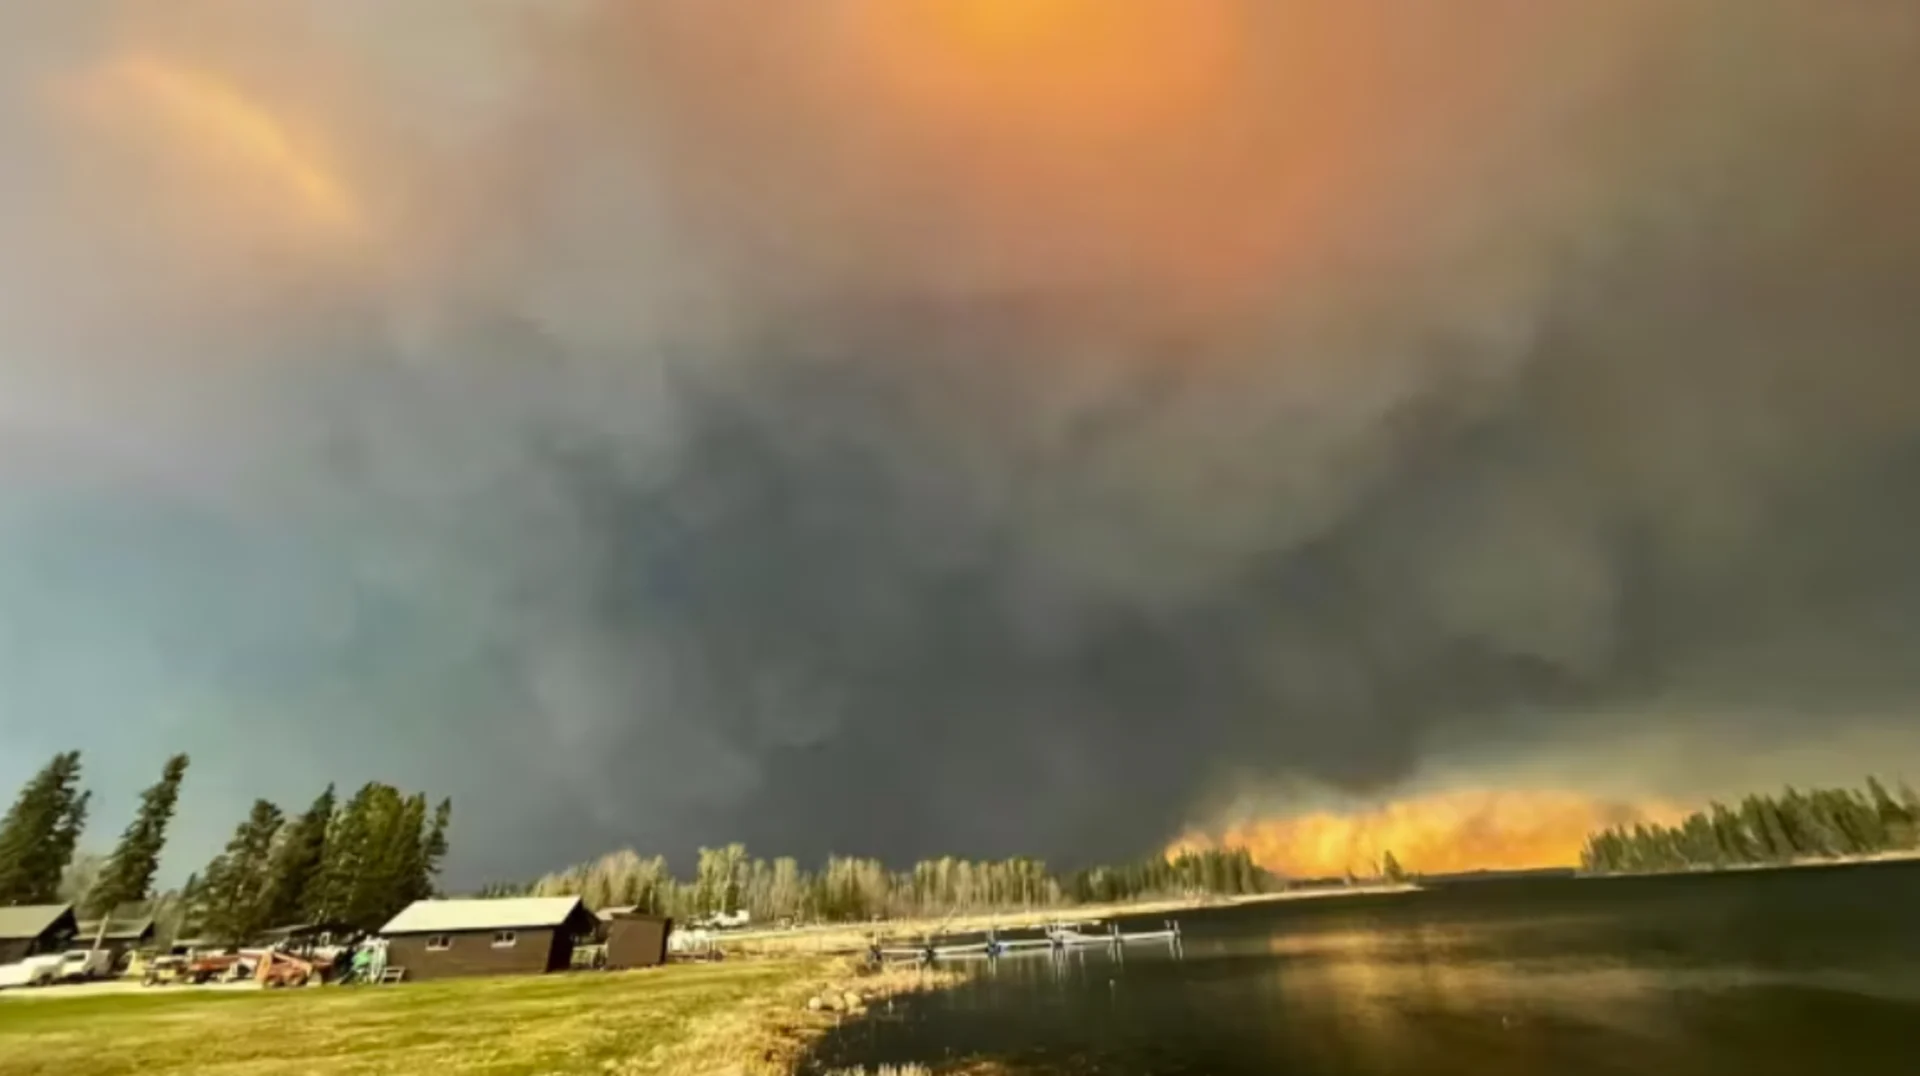 Evacuations continue as a wildfire continues to burn out of control in Manitoba. Details, here